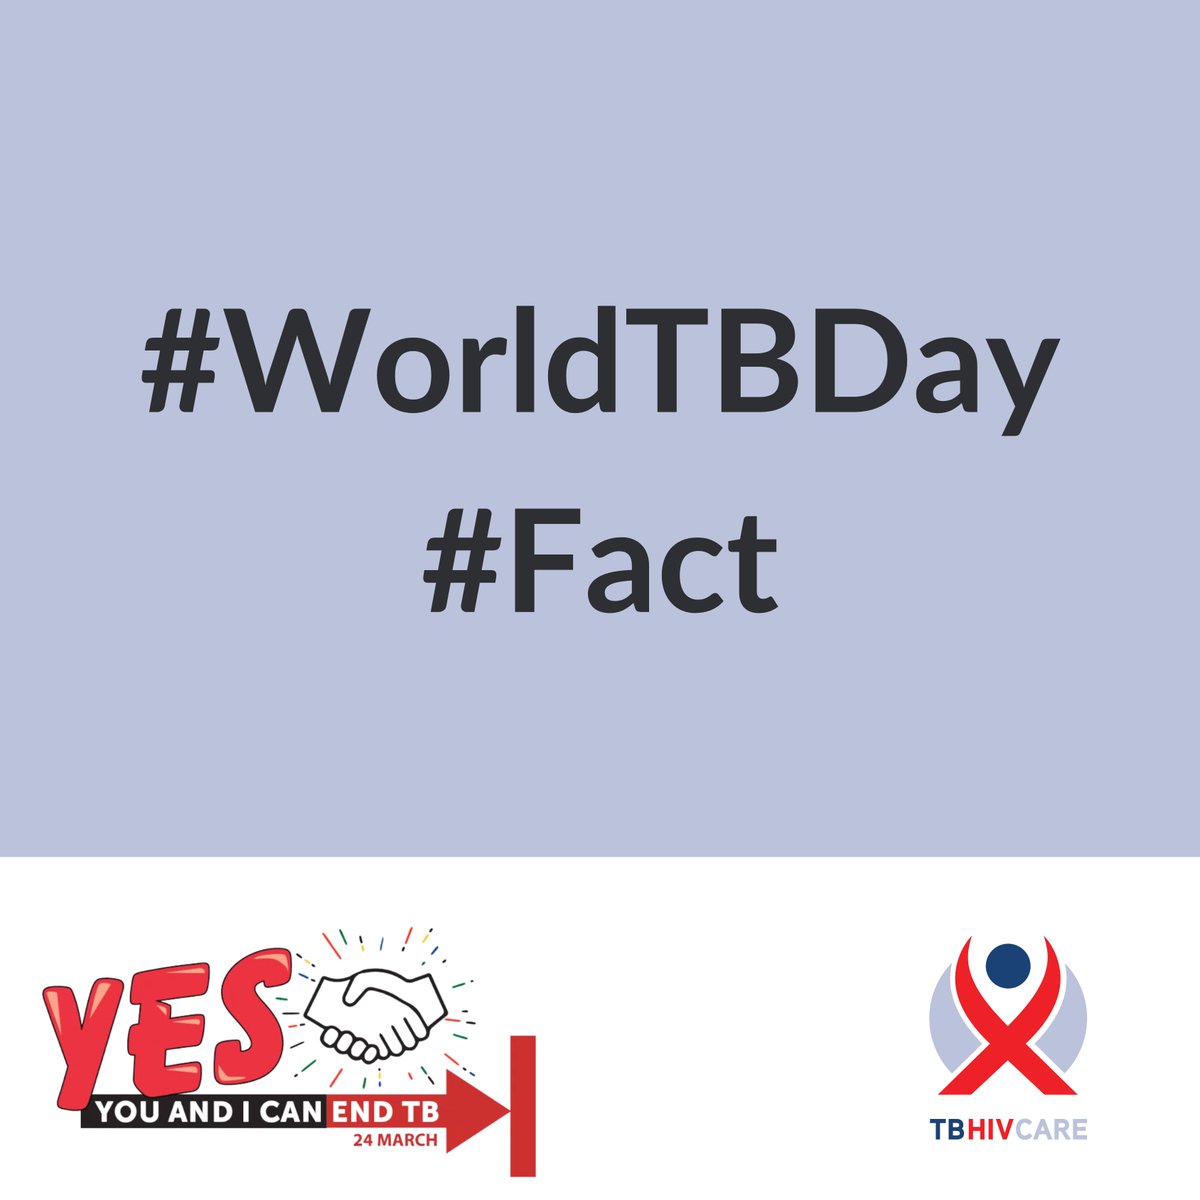 Every year, more than 54,000 people die from TB in South Africa, an airborne preventable & curable disease. We call on everyone to invest love, support, care, resources, and funding to #EndTB! @SA_AIDSCOUNCIL @StopTB @HealthZA #worldtbday